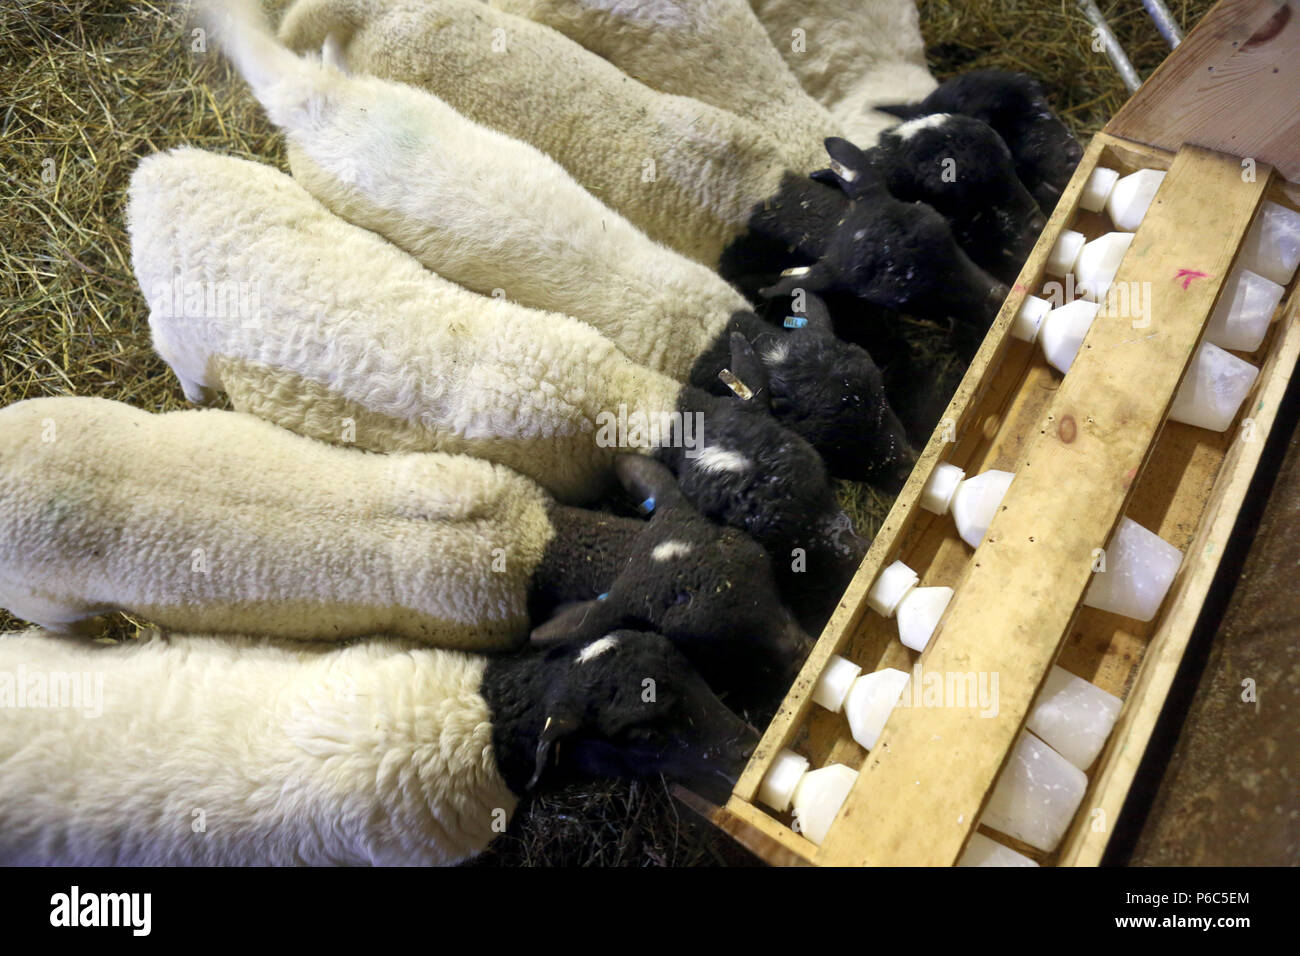 New Kaetwin, Germany - Young Dorper sheep drinking milk from bottles in the barn Stock Photo